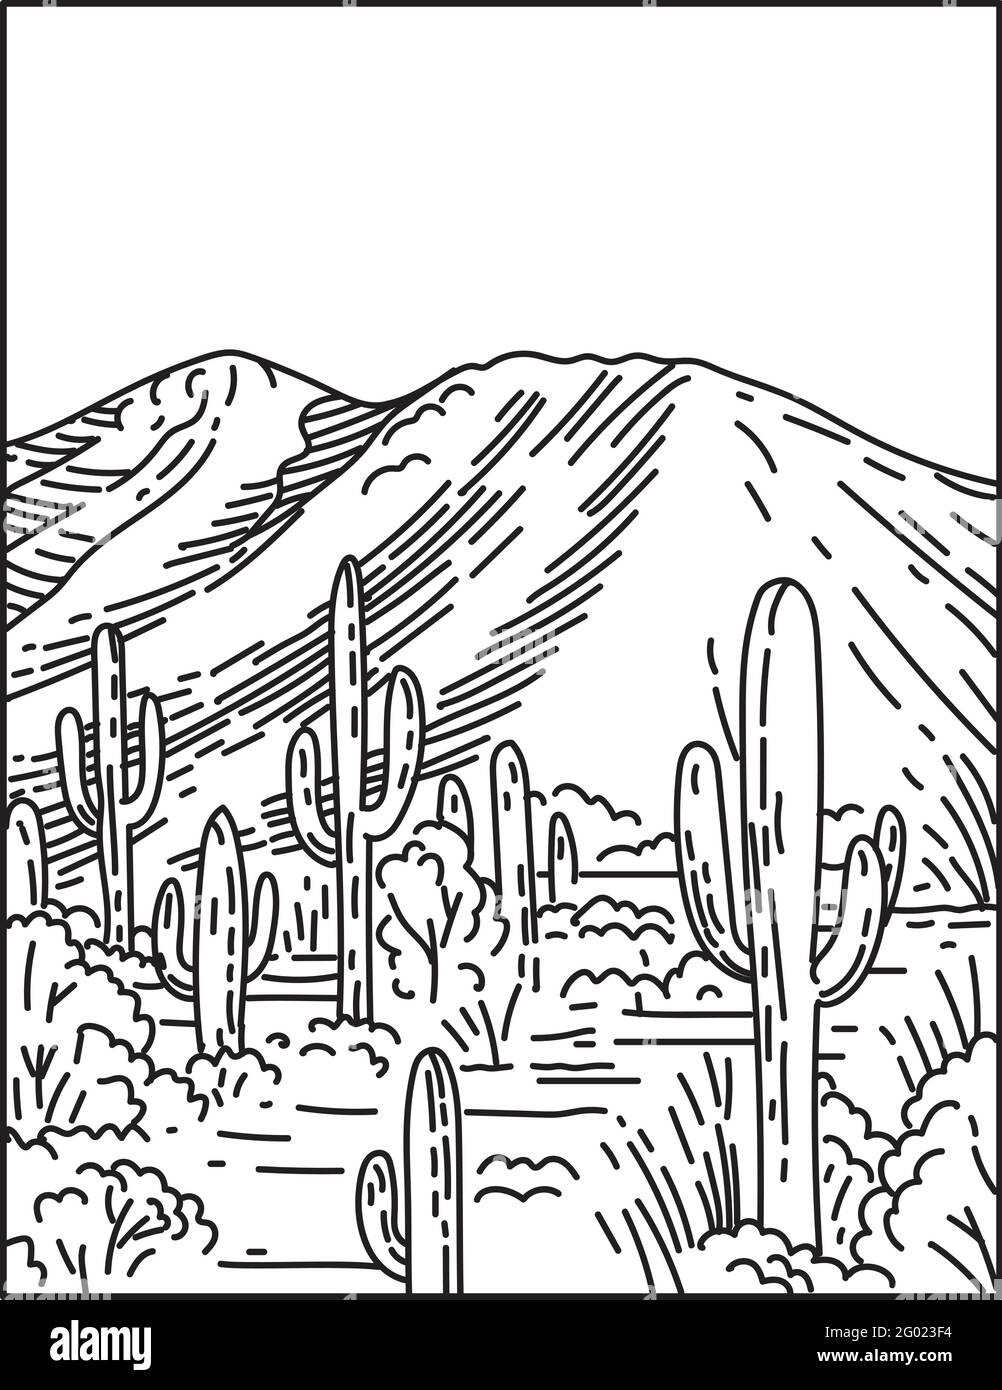 Mono line illustration of the Wasson Peak at the Tucson Mountain District in Saguaro National Park located in Arizona, United States done in retro bla Stock Vector